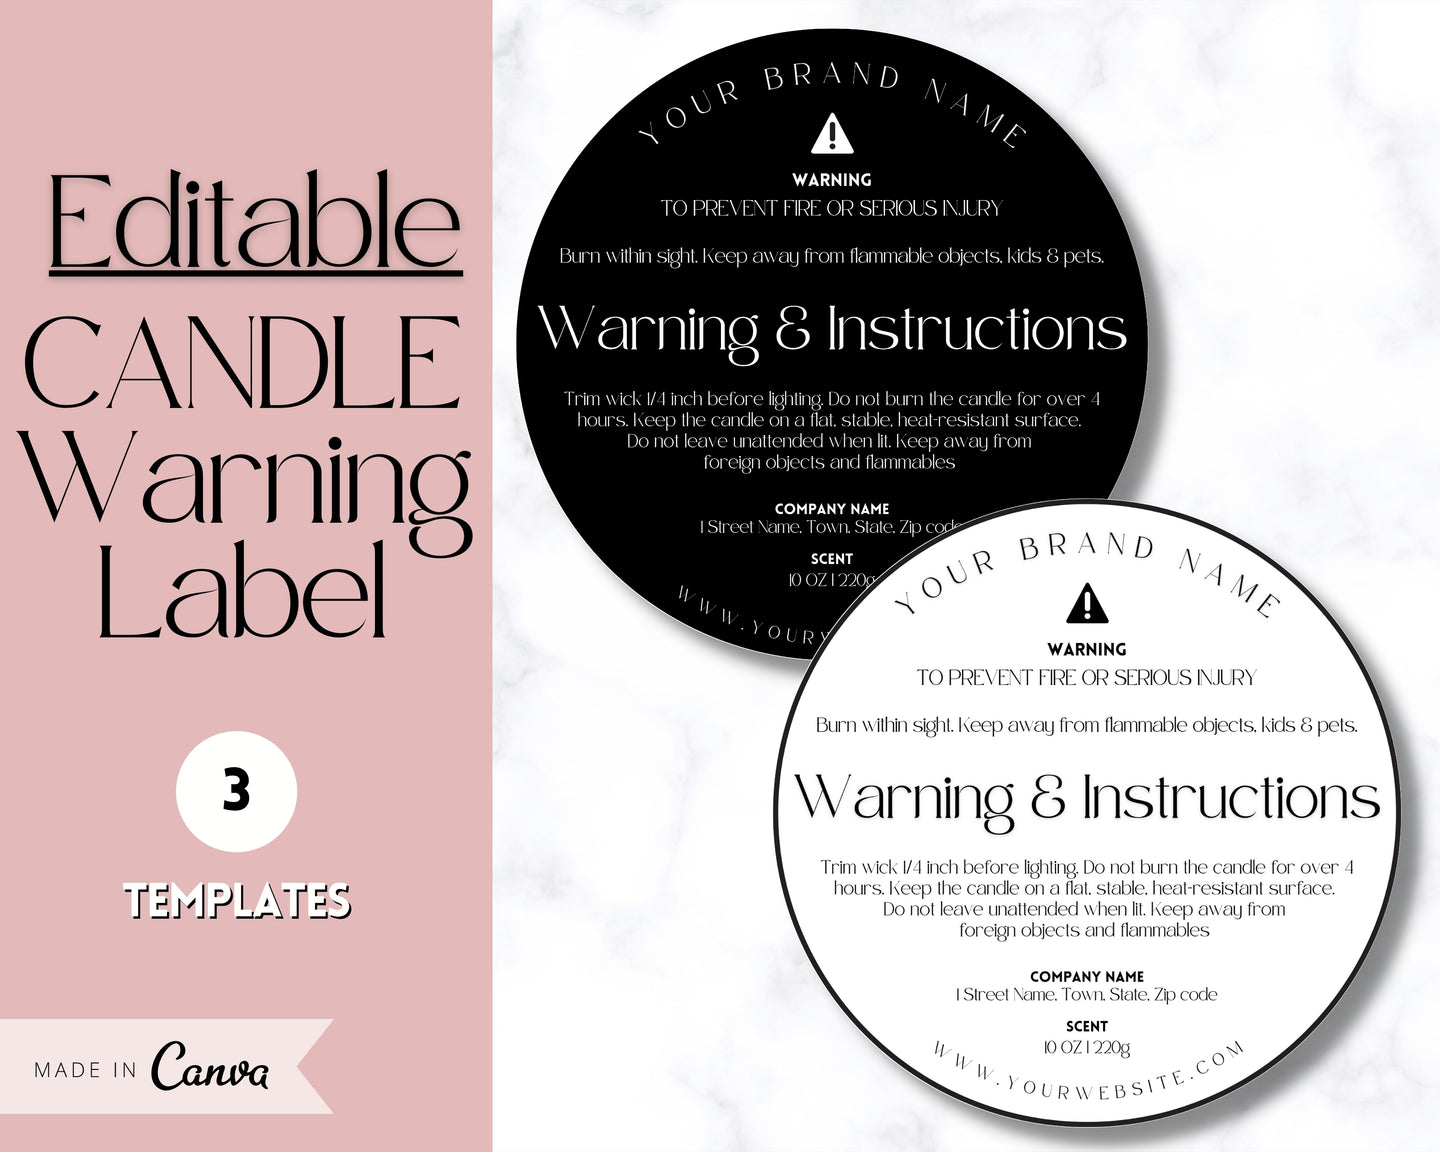 EDITABLE Candle Warning Label Template | Candle Care & Fire Safety Instructions, Round Packaging Label Care Card, Candle Maker Seller | Safira